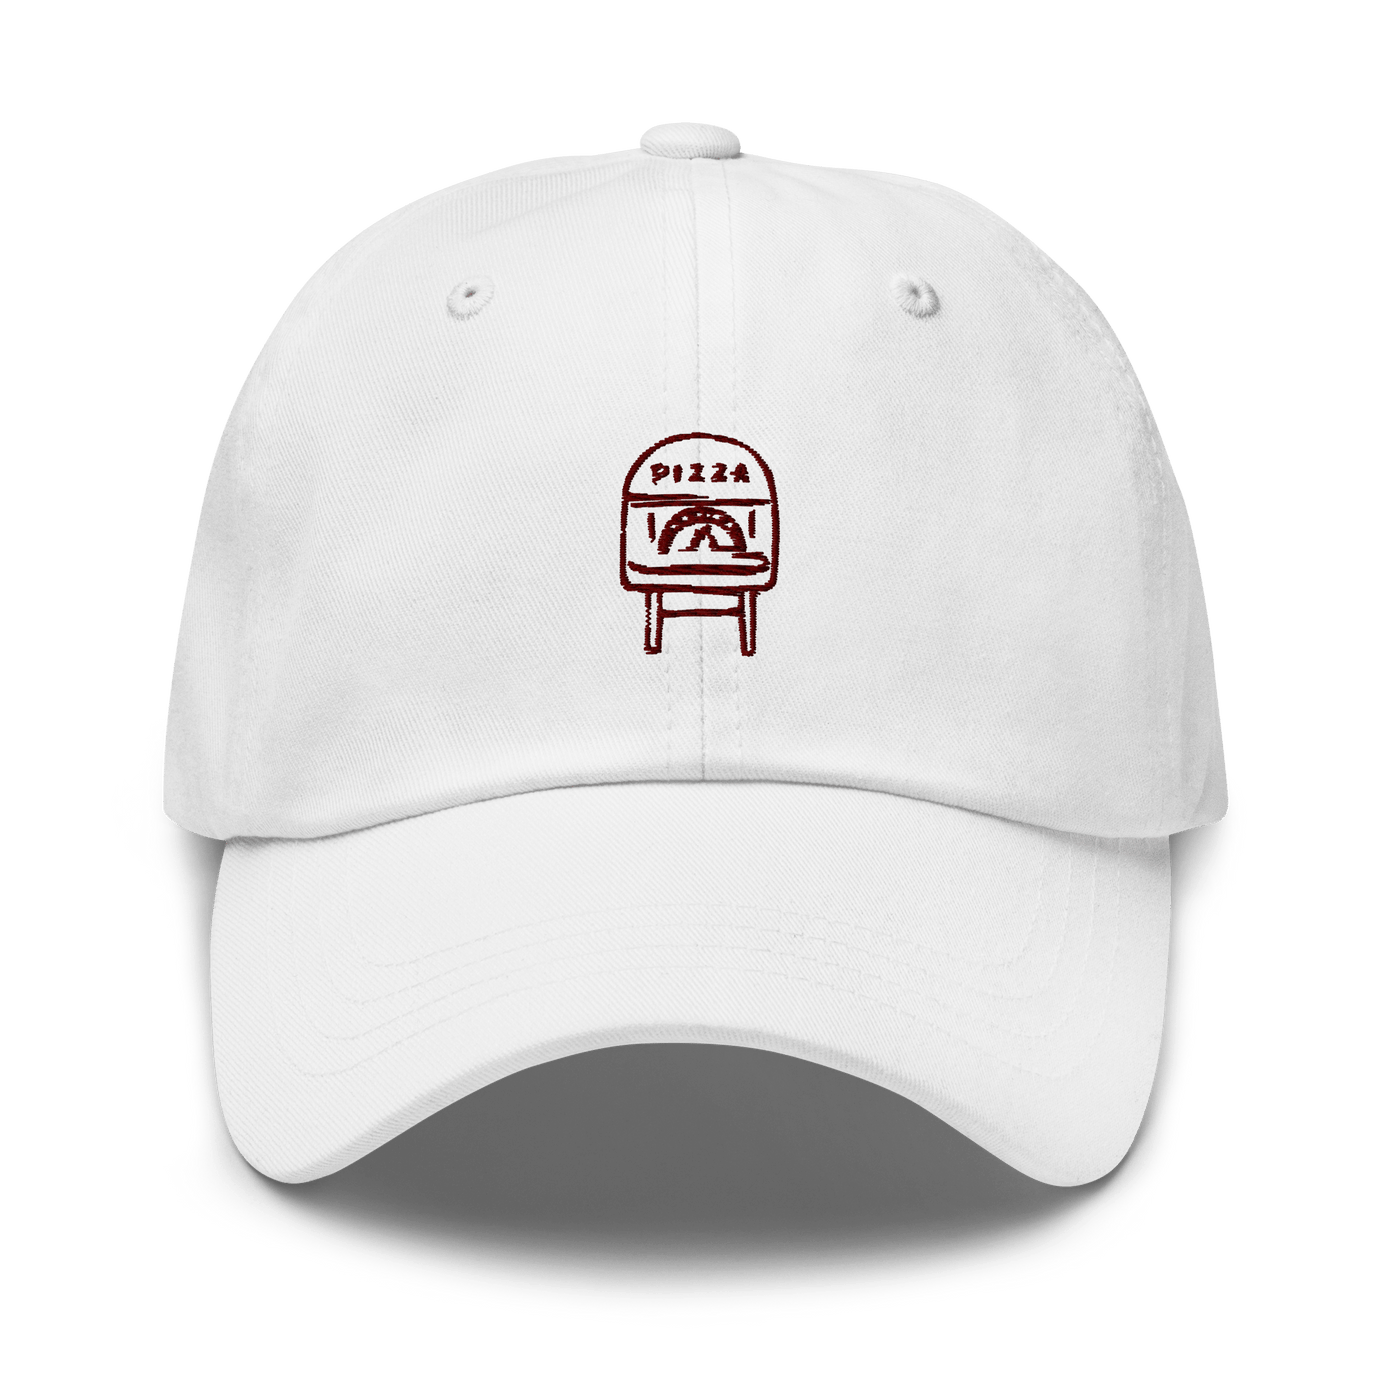 JACS x Meno Male "The Oven" - Just Another Cap Store